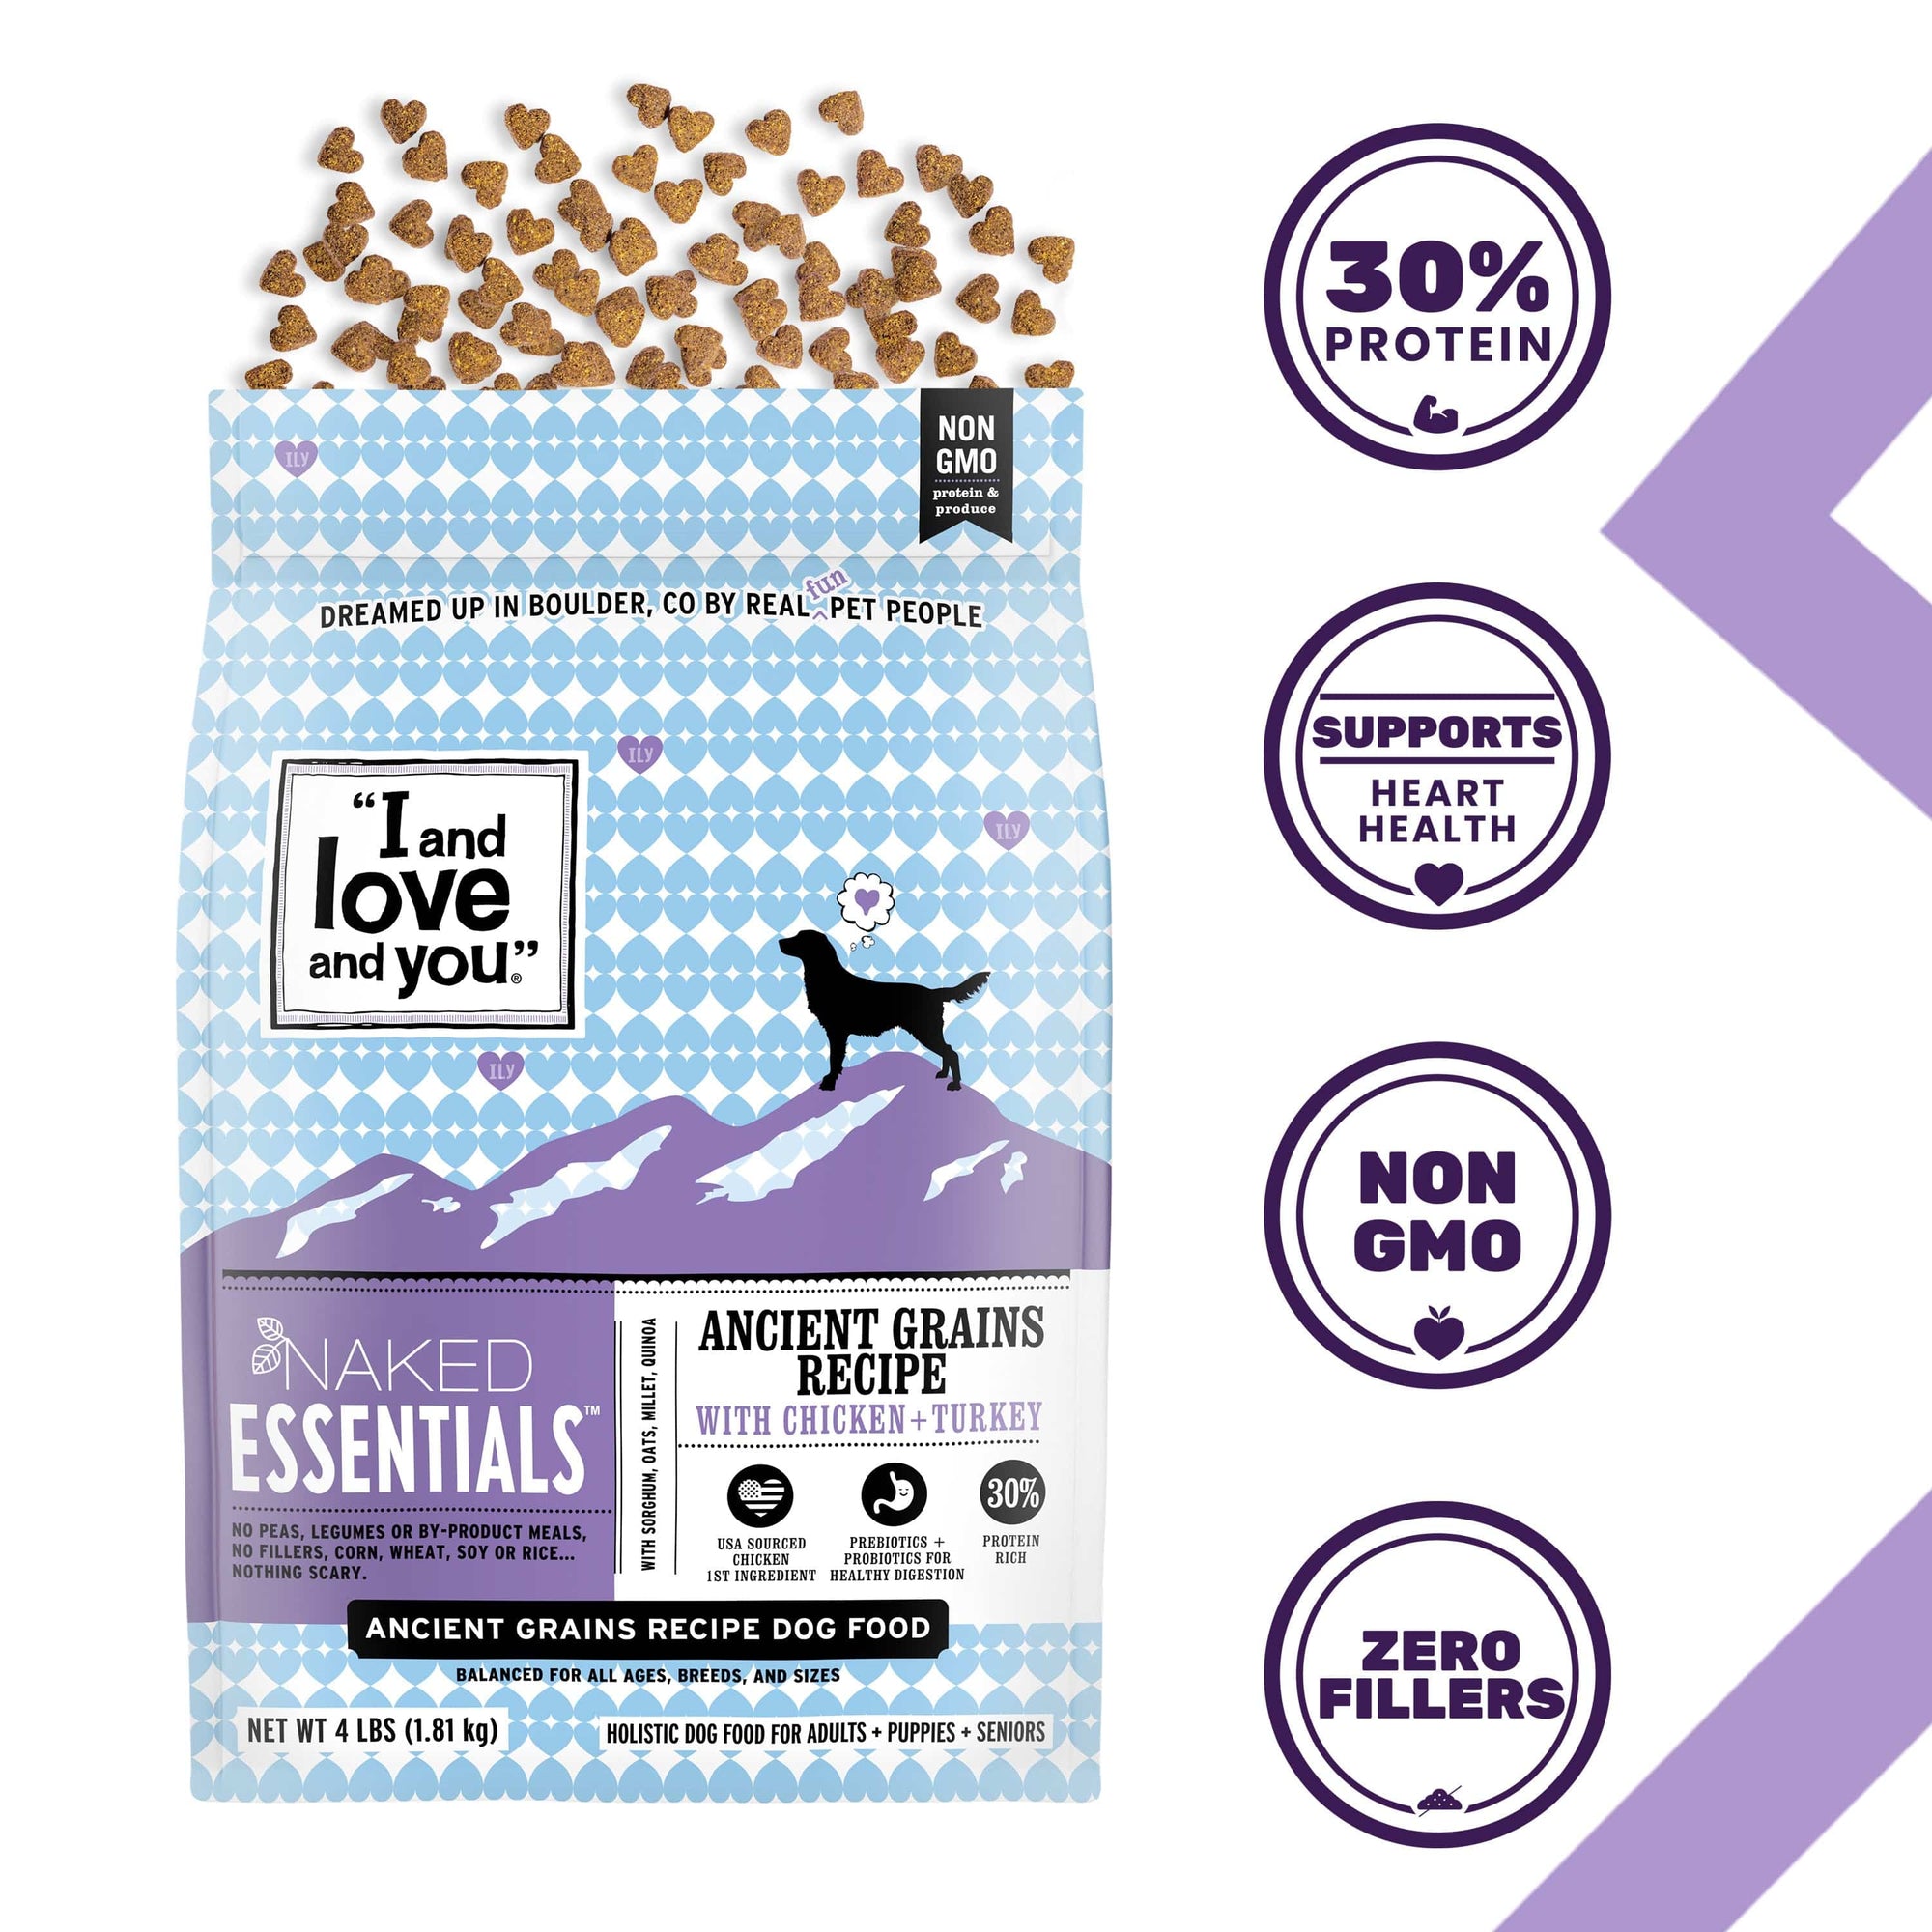 A bag of dog food featuring Naked Essentials Ancient Grains - Chicken + Turkey kibble with USA farm-raised ingredients and added omegas, pre & probiotics, and ancient grains for energy and nutrition.